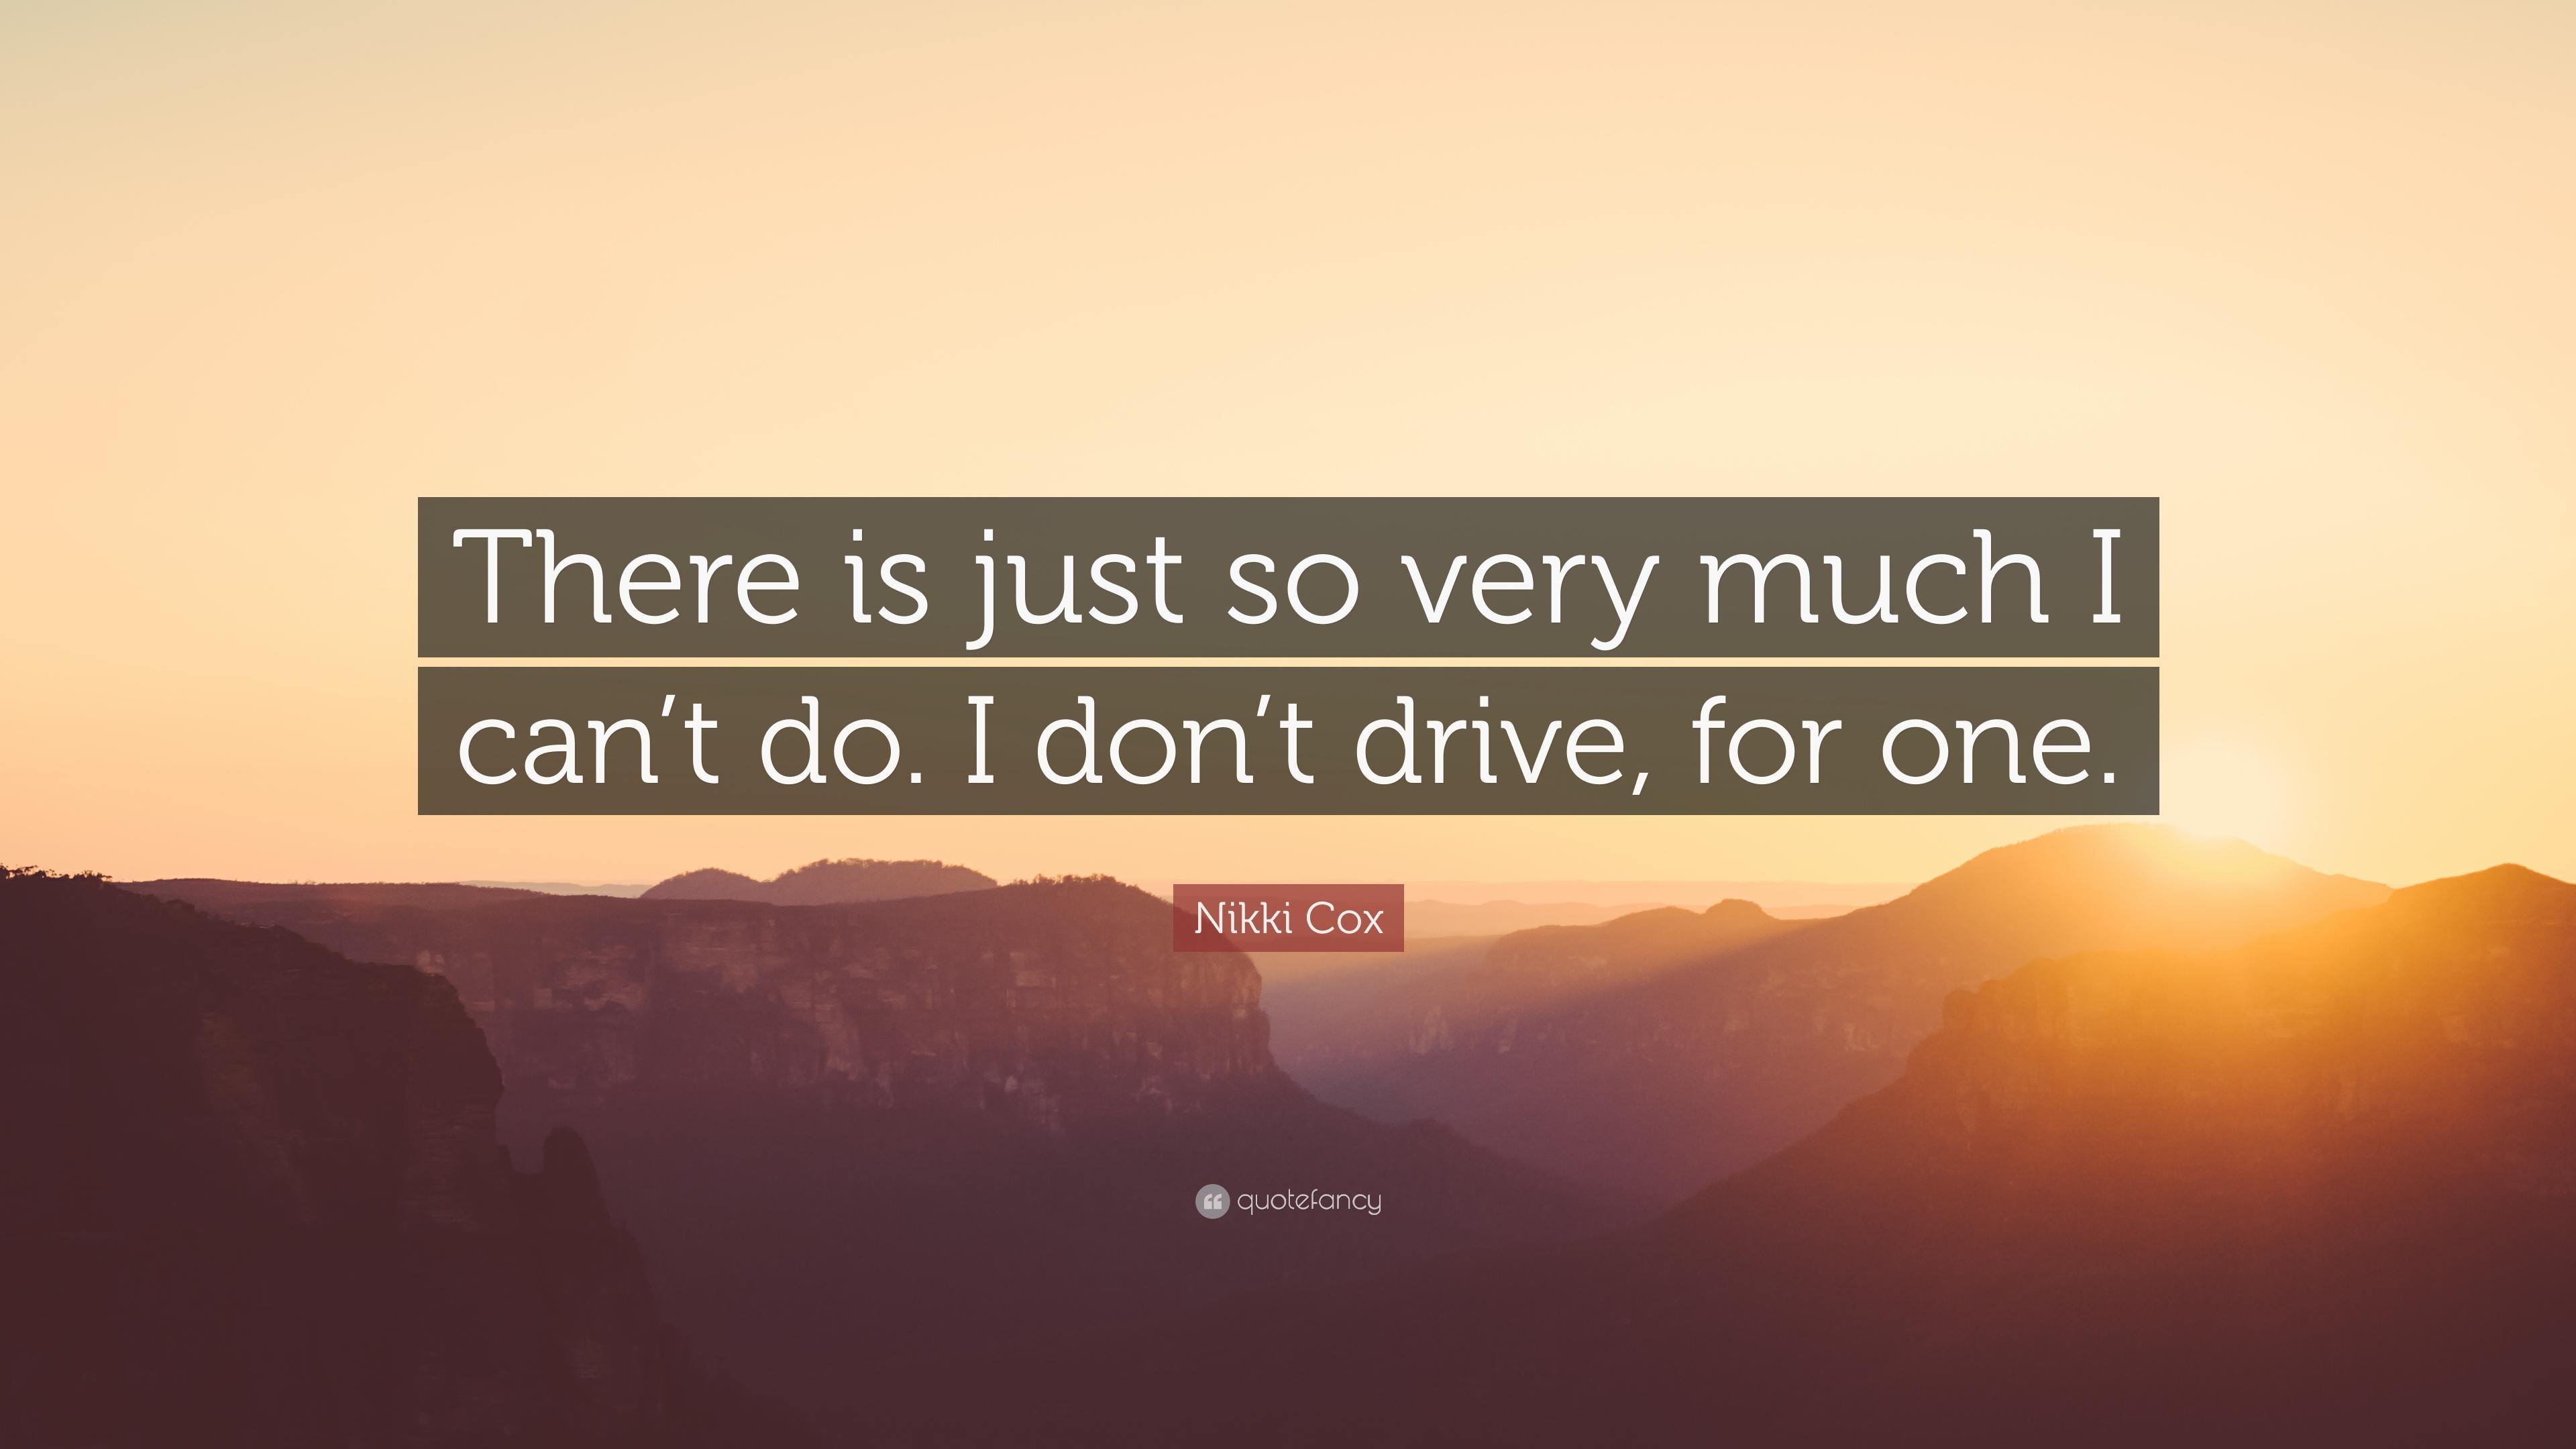 Nikki Cox Quote: "There is just so very much I can't do. 